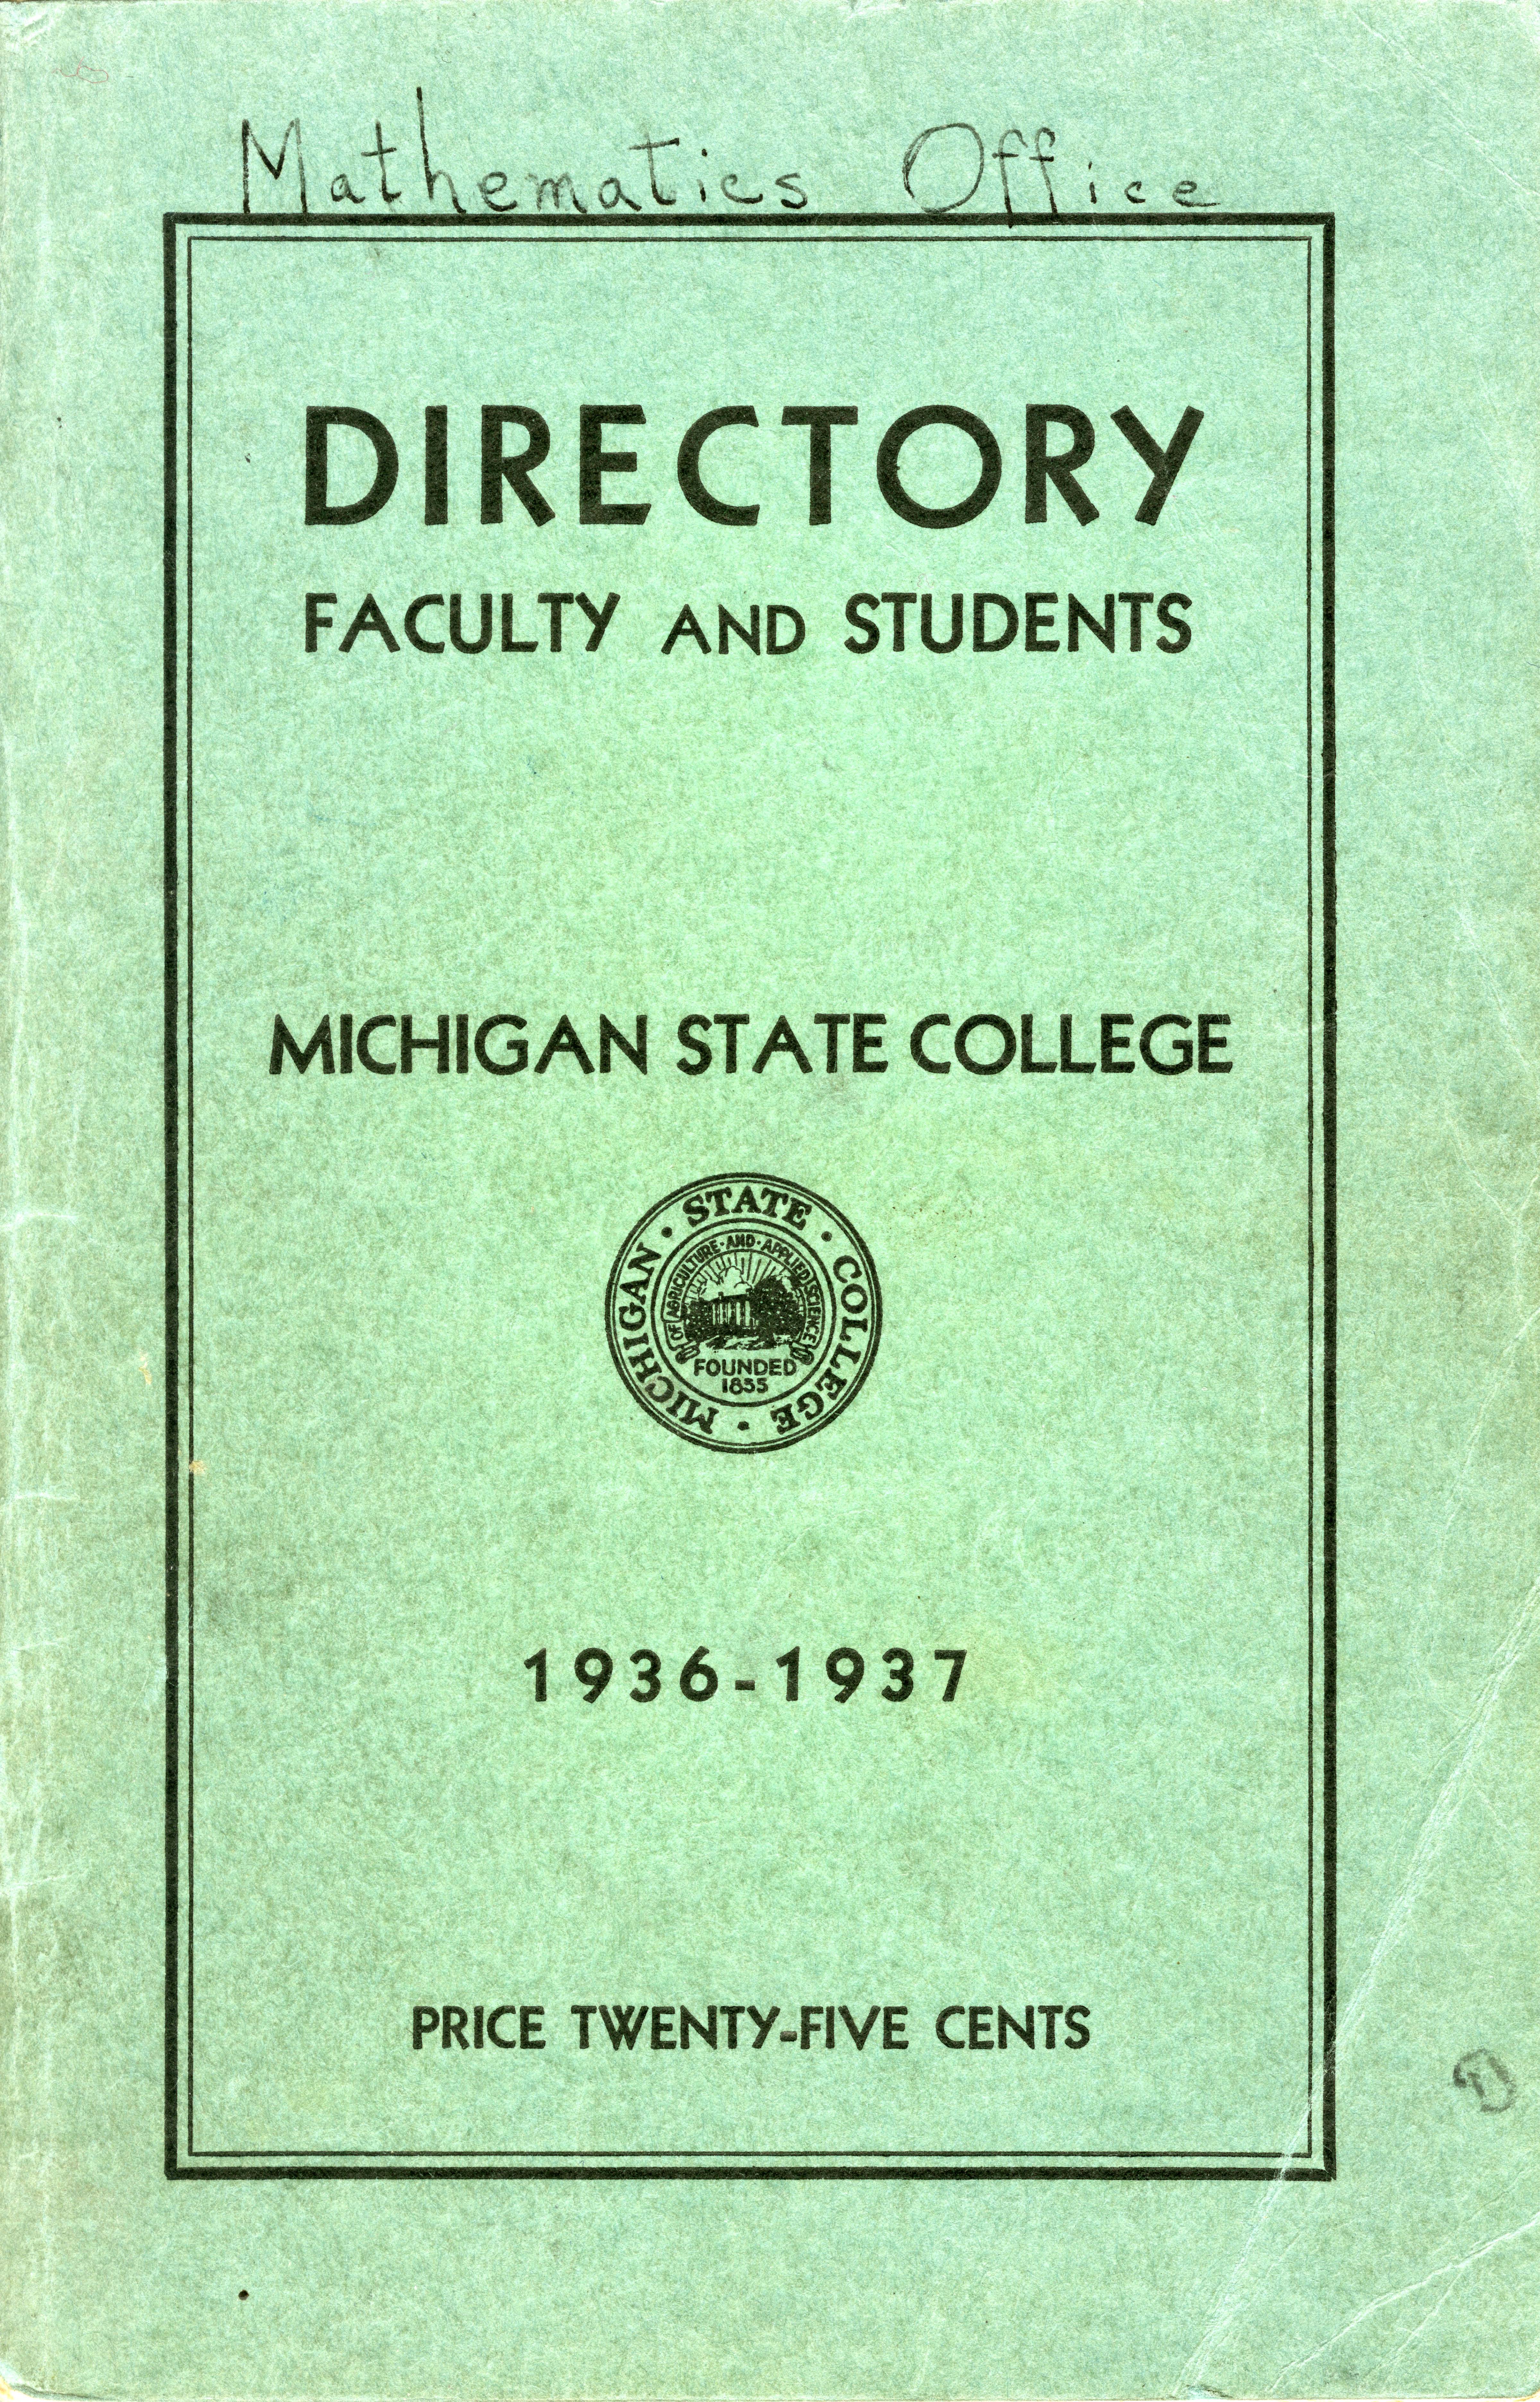 Faculty and Student Directories